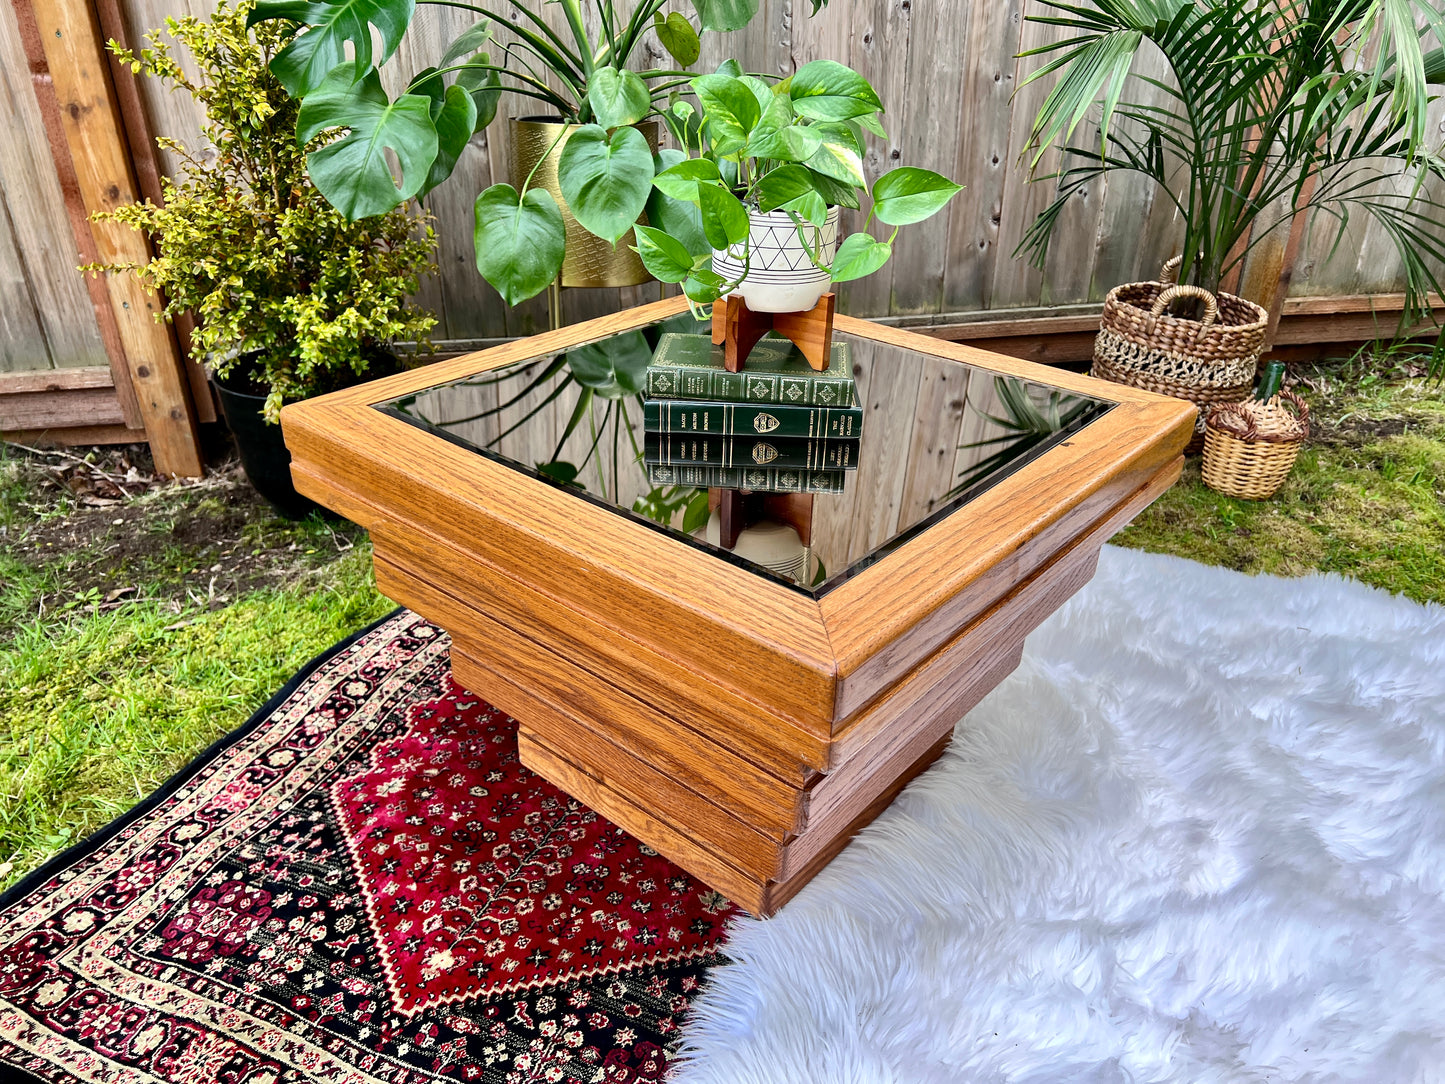 The Pyramid Coffee Table